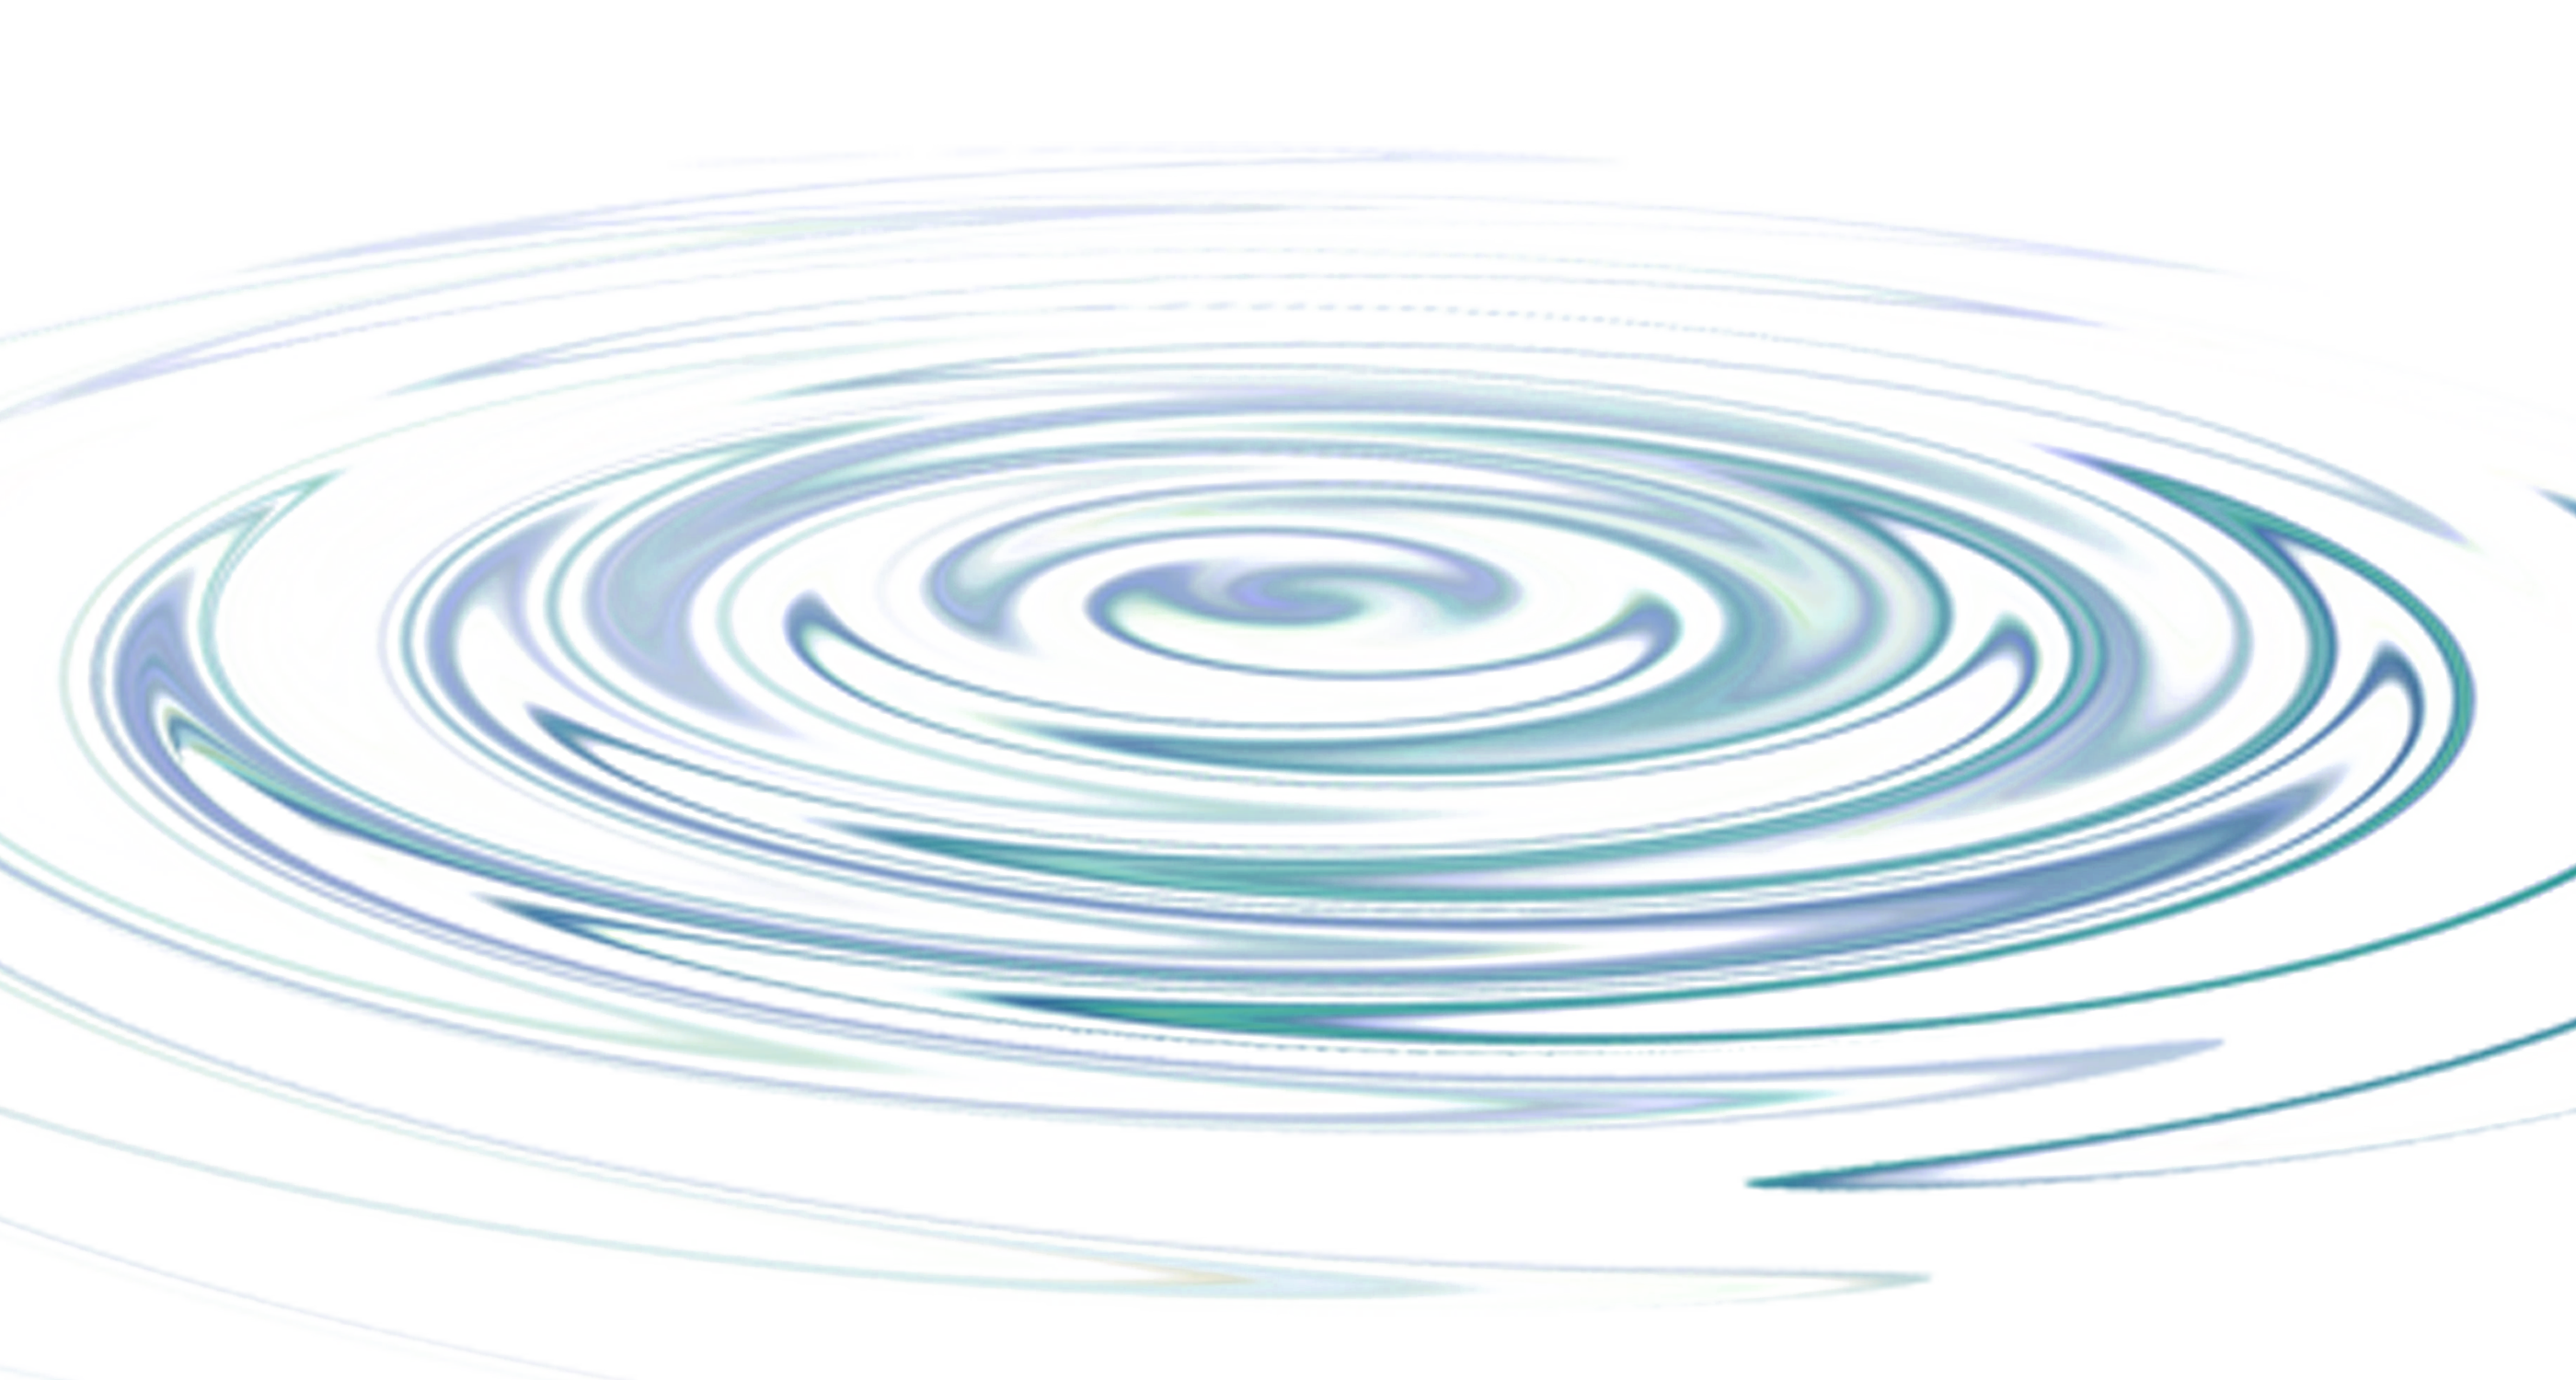 0 Result Images of Water Ripple Vector Png - PNG Image Collection